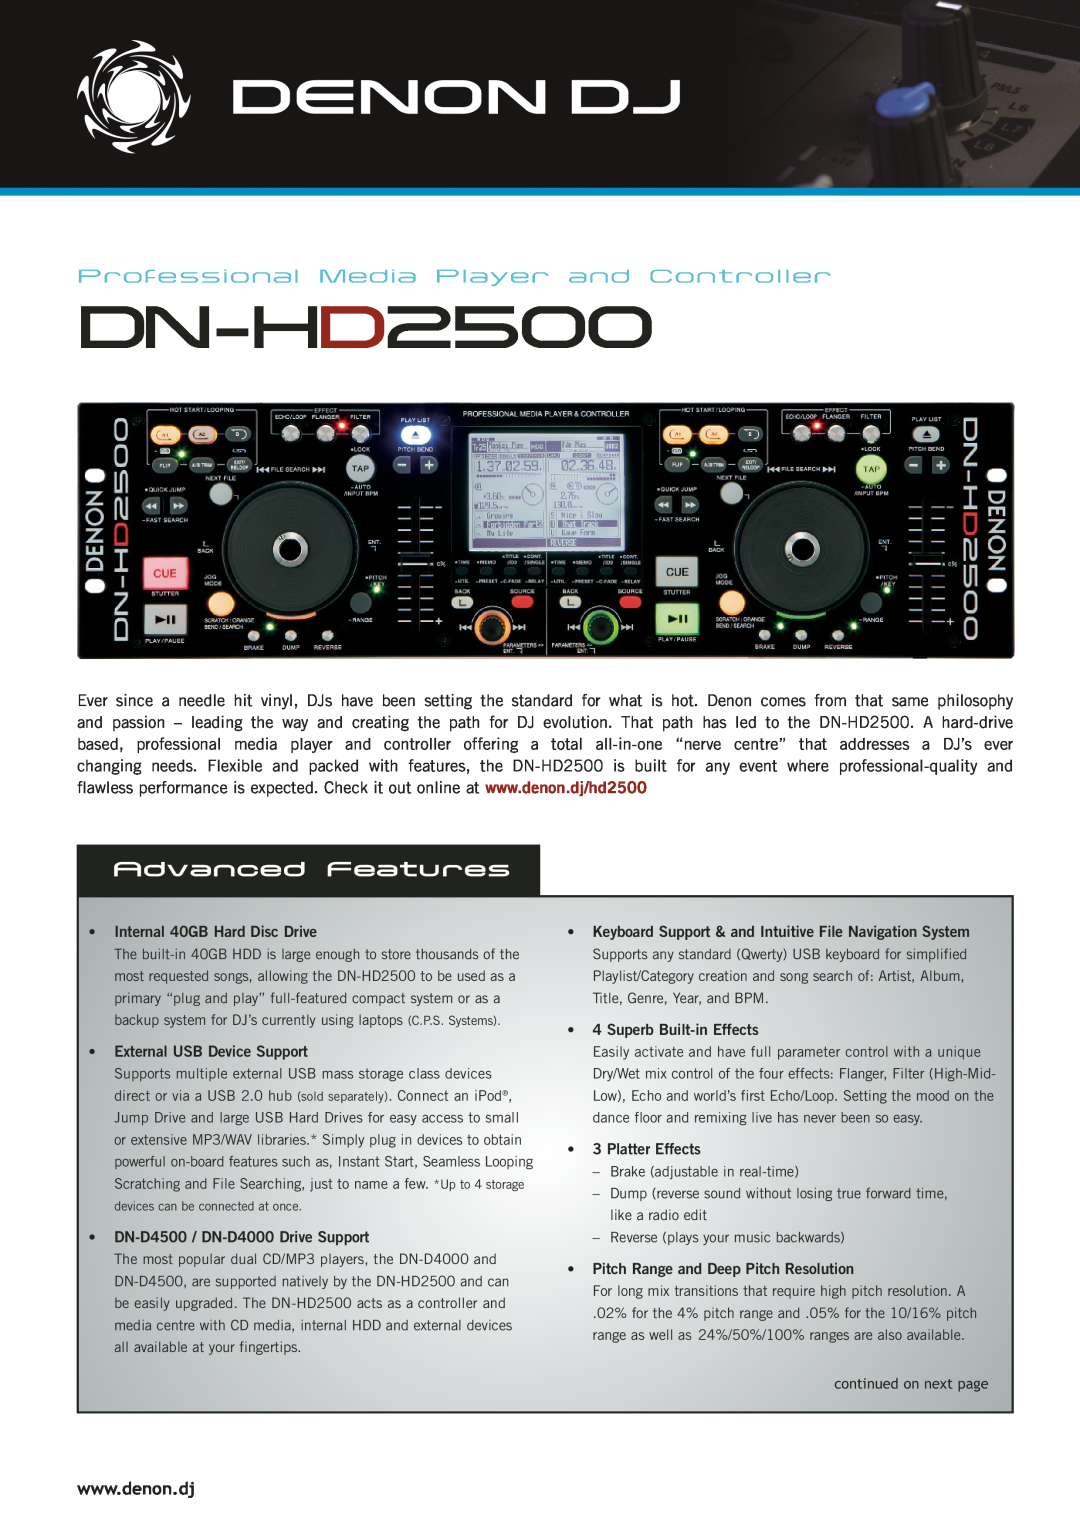 Denon DJ DN-HD2500 manual Advanced Features, Professional Media Player and Controller, continued on next page 